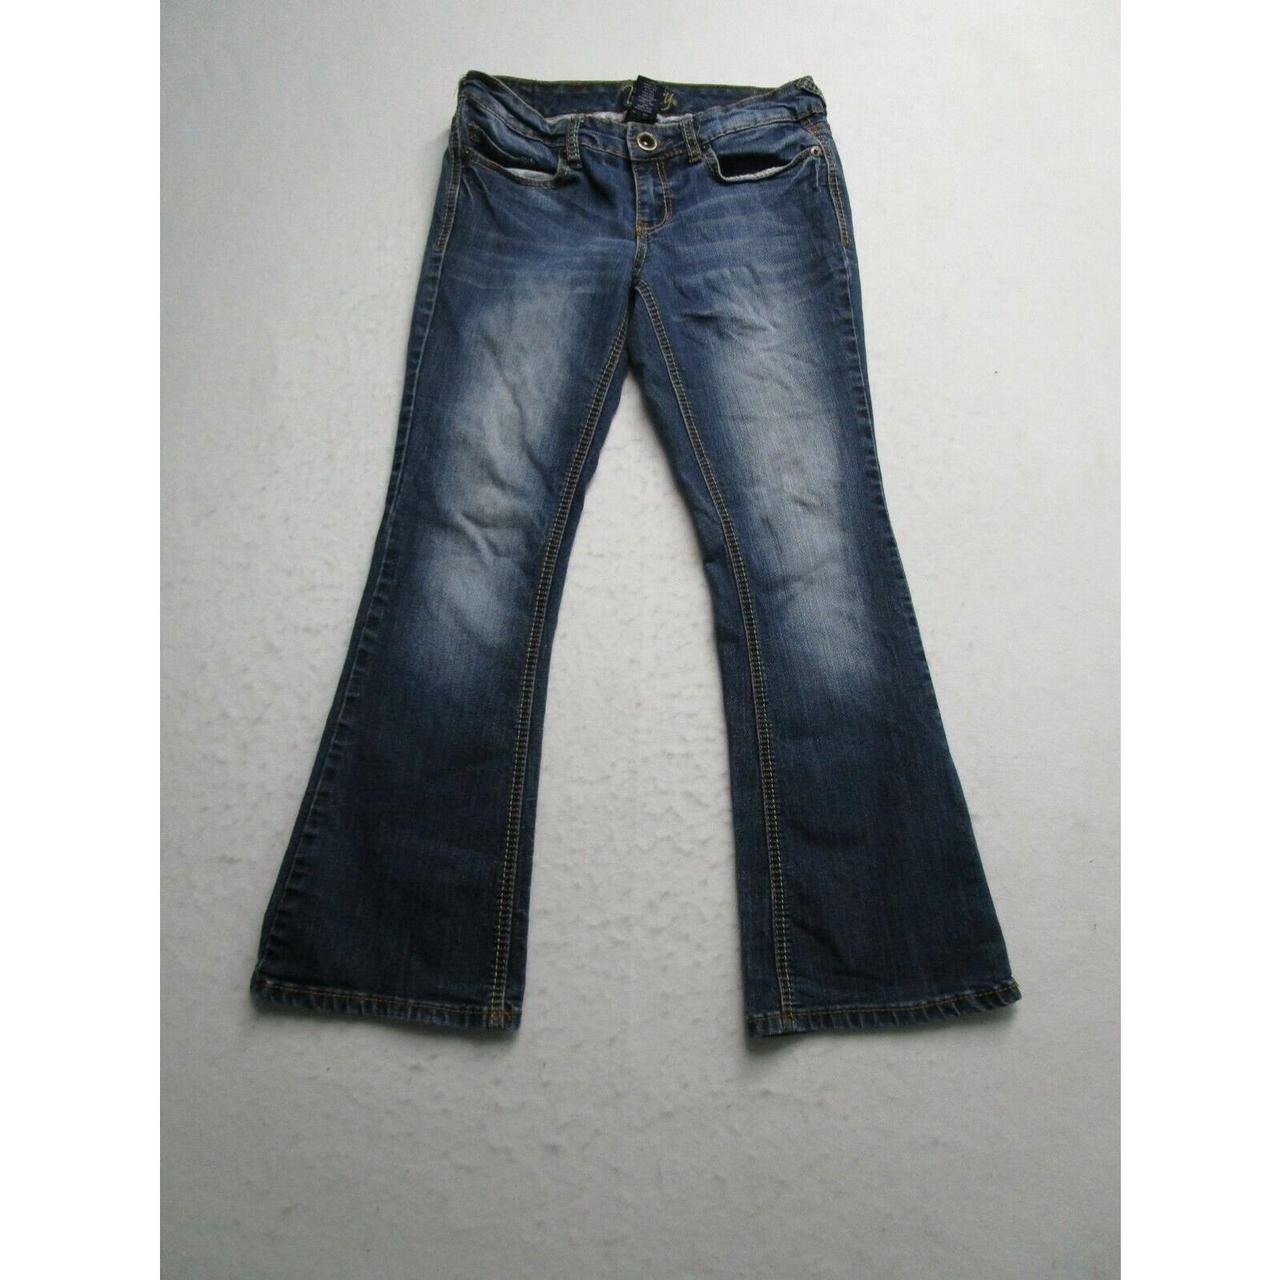 Product Image 1 - Vanity Jeans Women’s 28x26 Flared